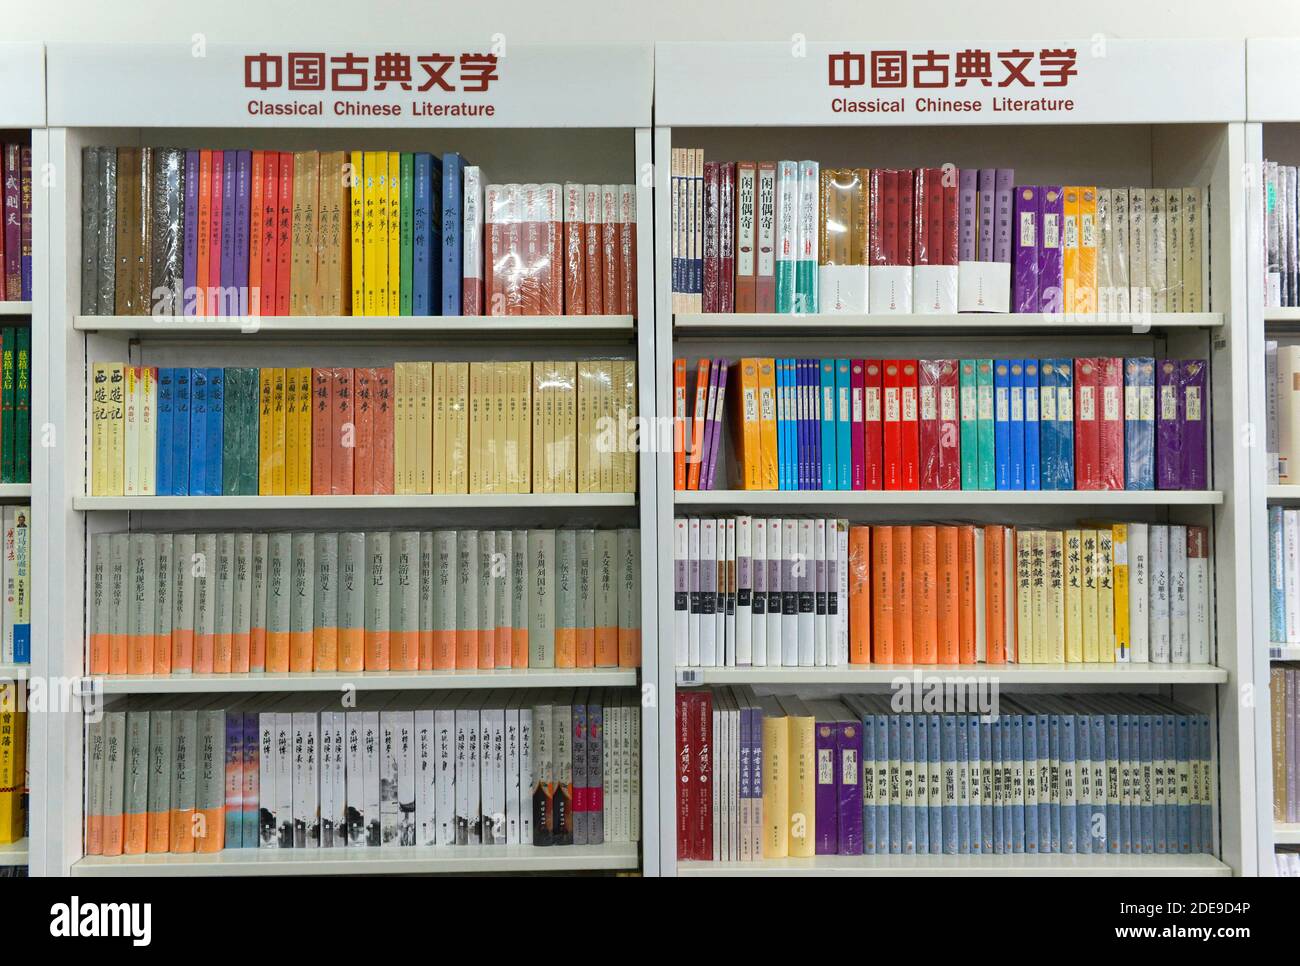 Shelves of books on classical Chinese literature in a Xinhua bookshop in Xicheng district, Beijing, China Stock Photo